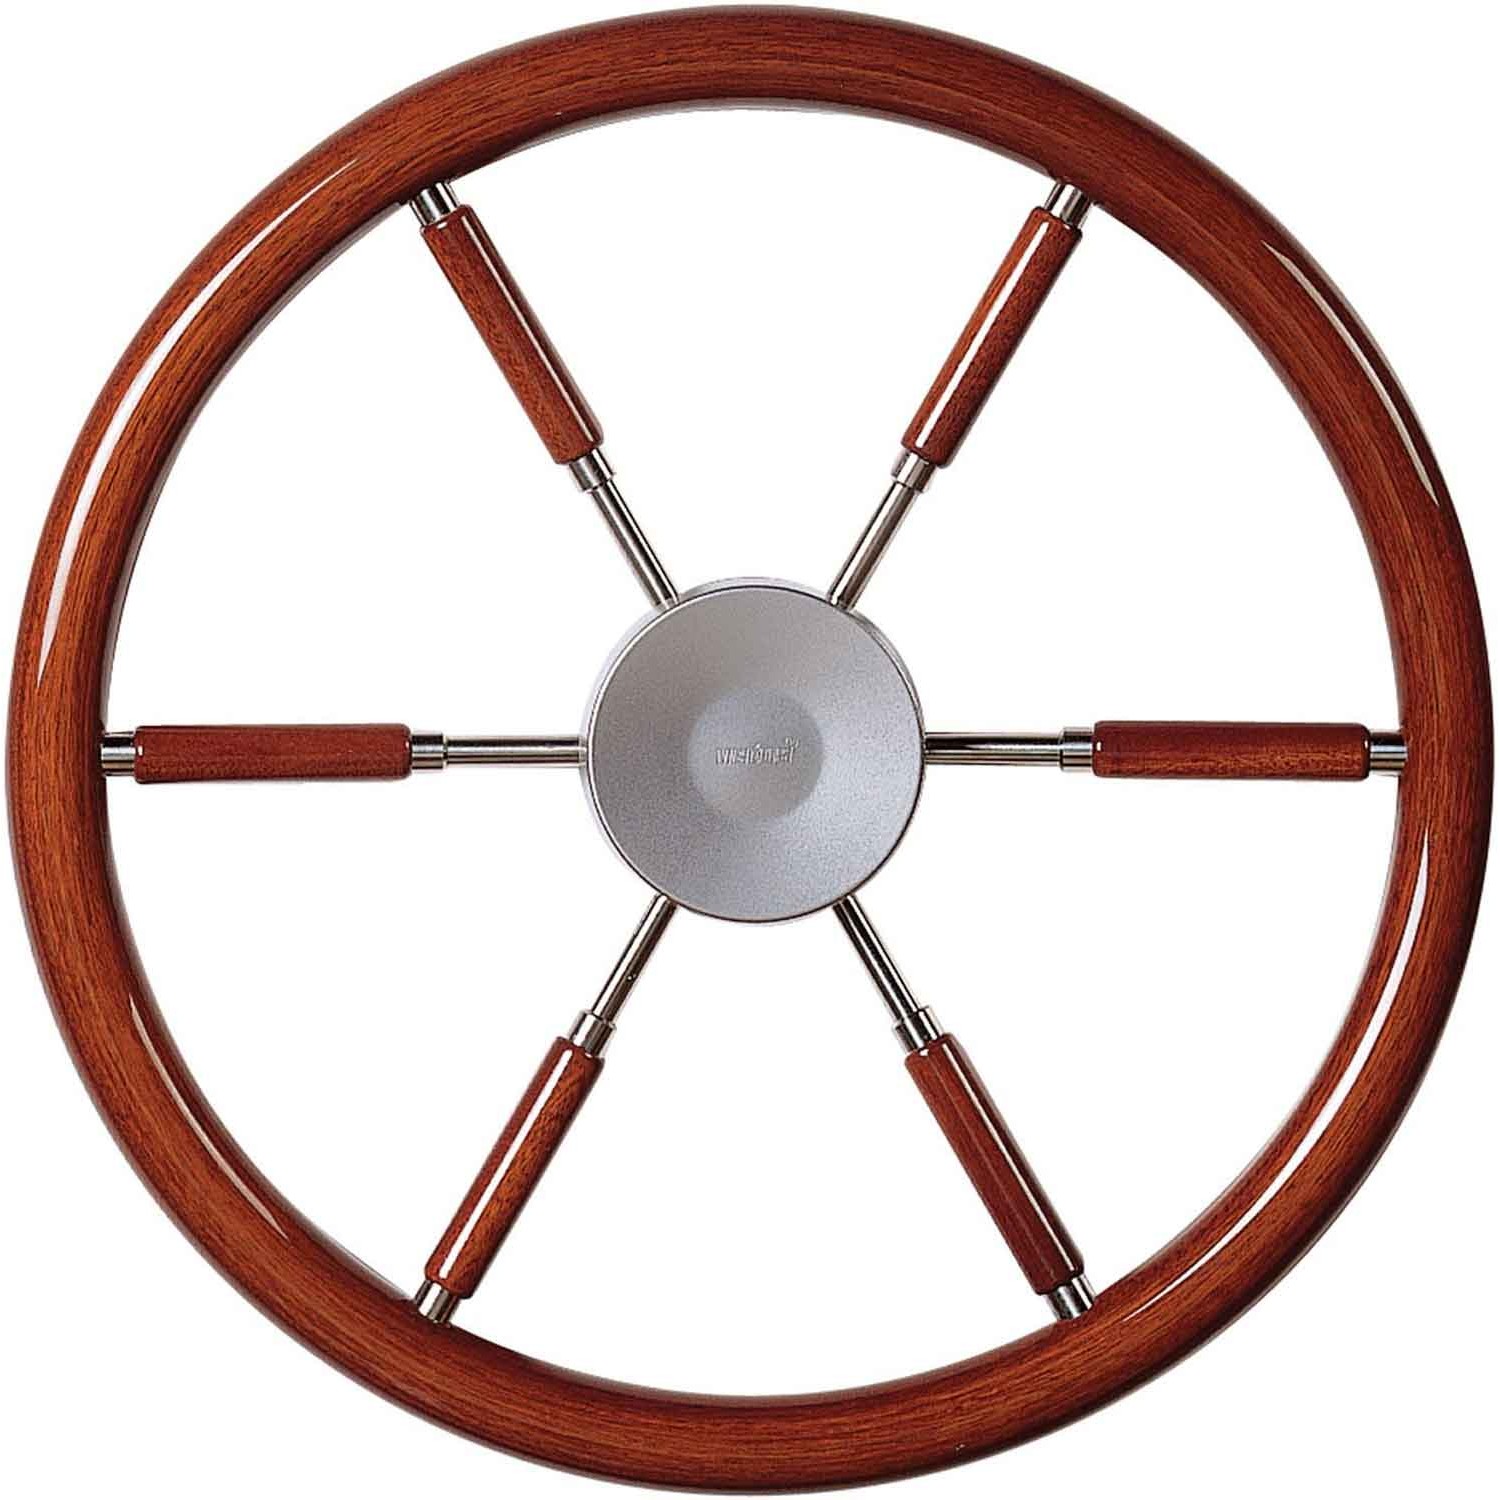 New 14 Inch Slotted Spoke Wood Marine Boat Steering Wheel With 3/4 Inch Shaft 